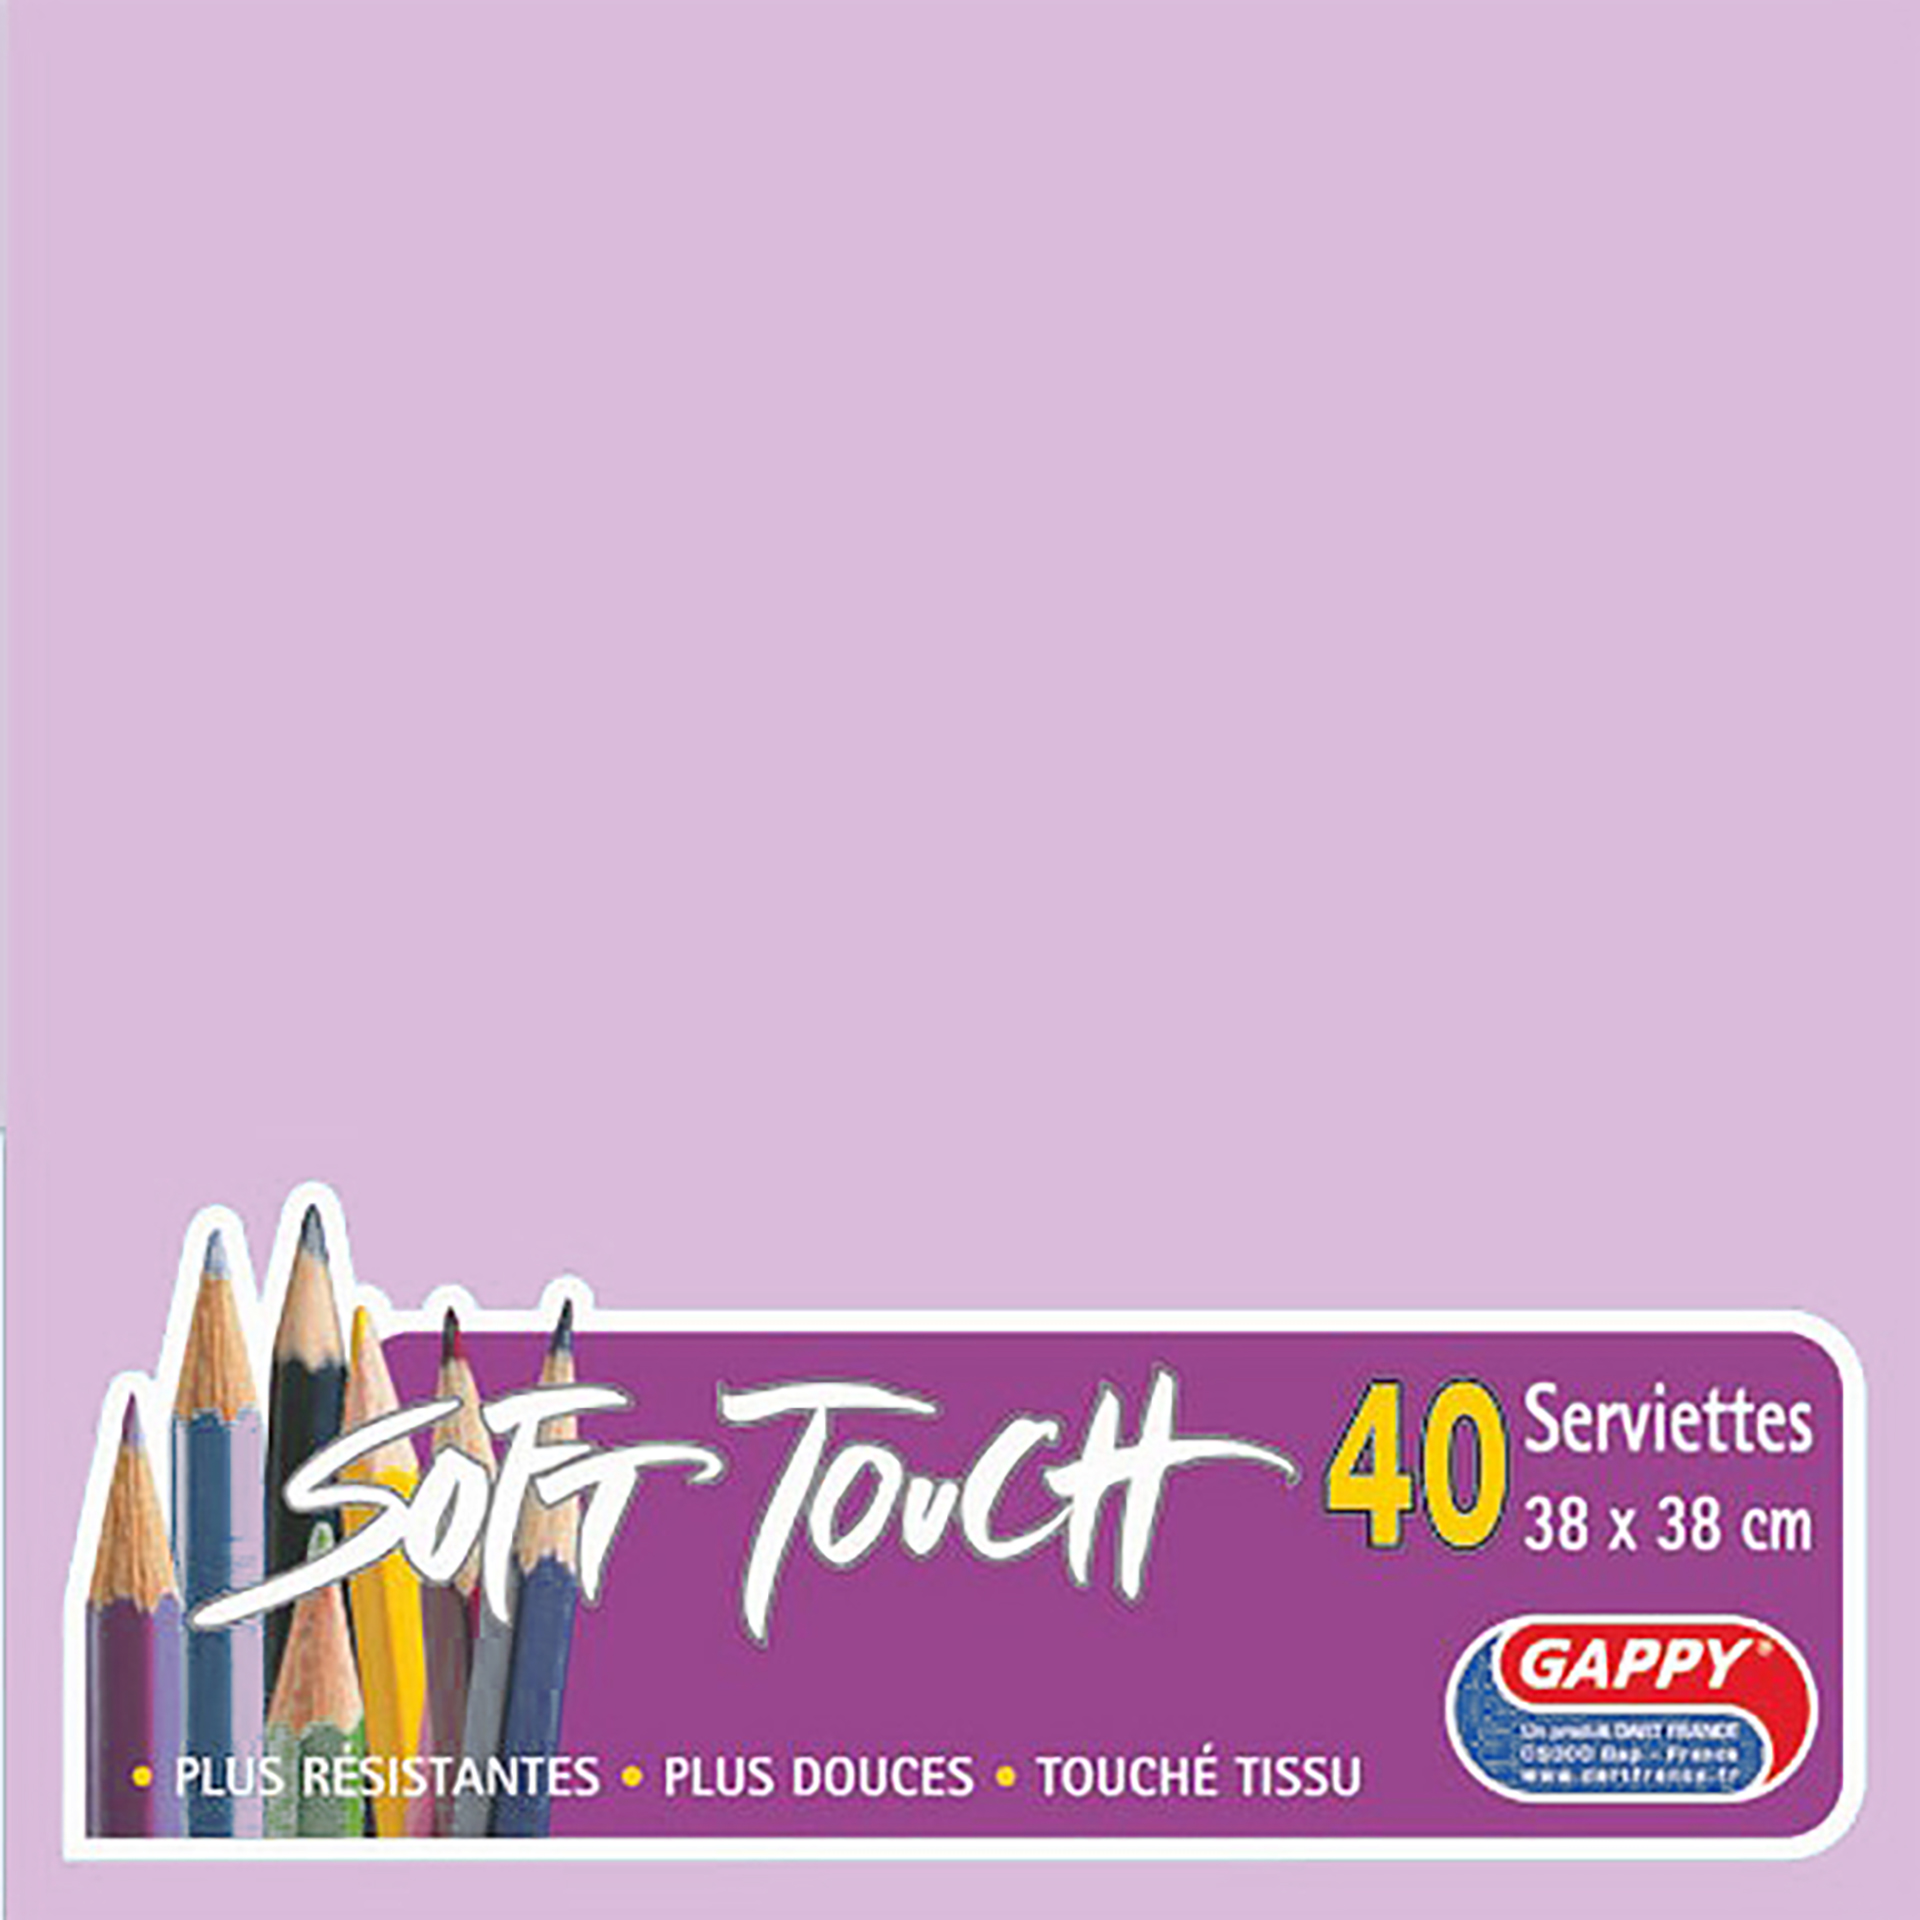 Soft_touch_new